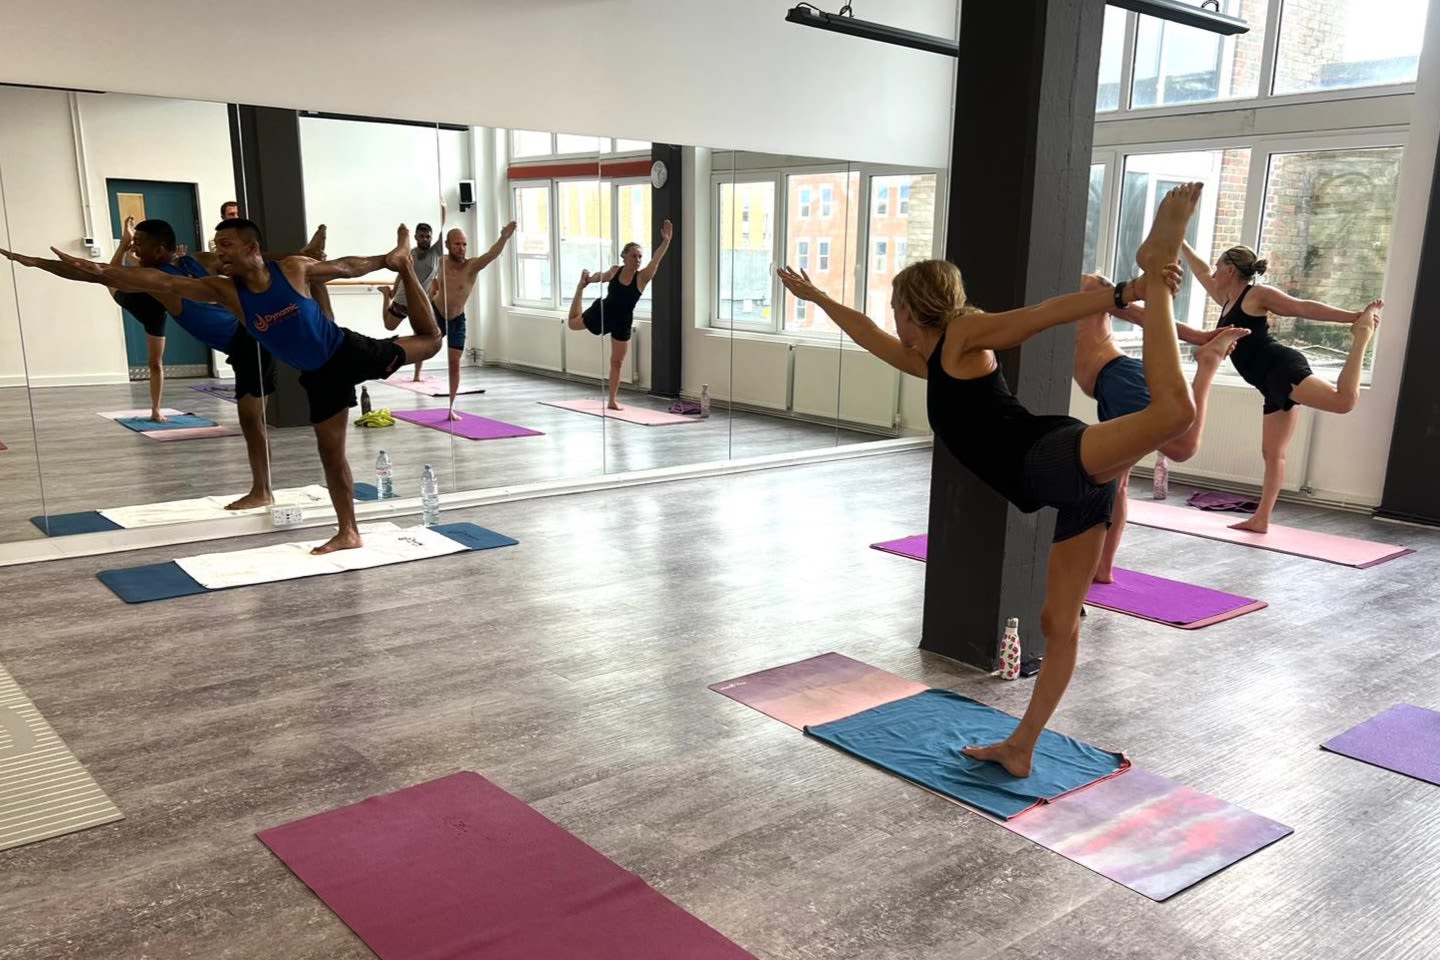 Dynamic Hot Yoga - Portslade: Read Reviews and Book Classes on ClassPass